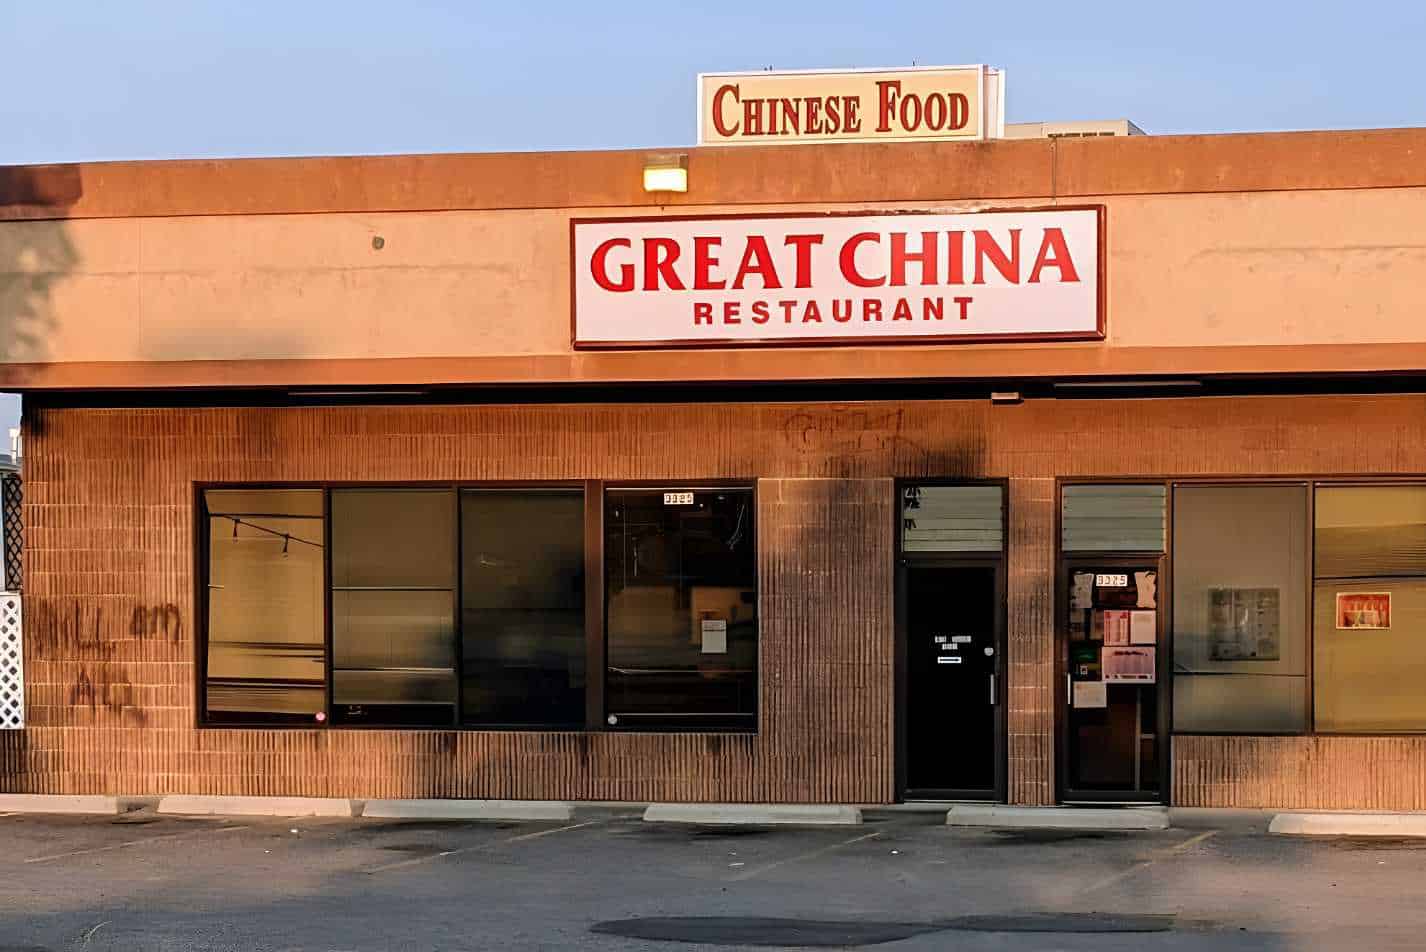 The Great China Best Chinese Restaurants in Albuquerque, NM